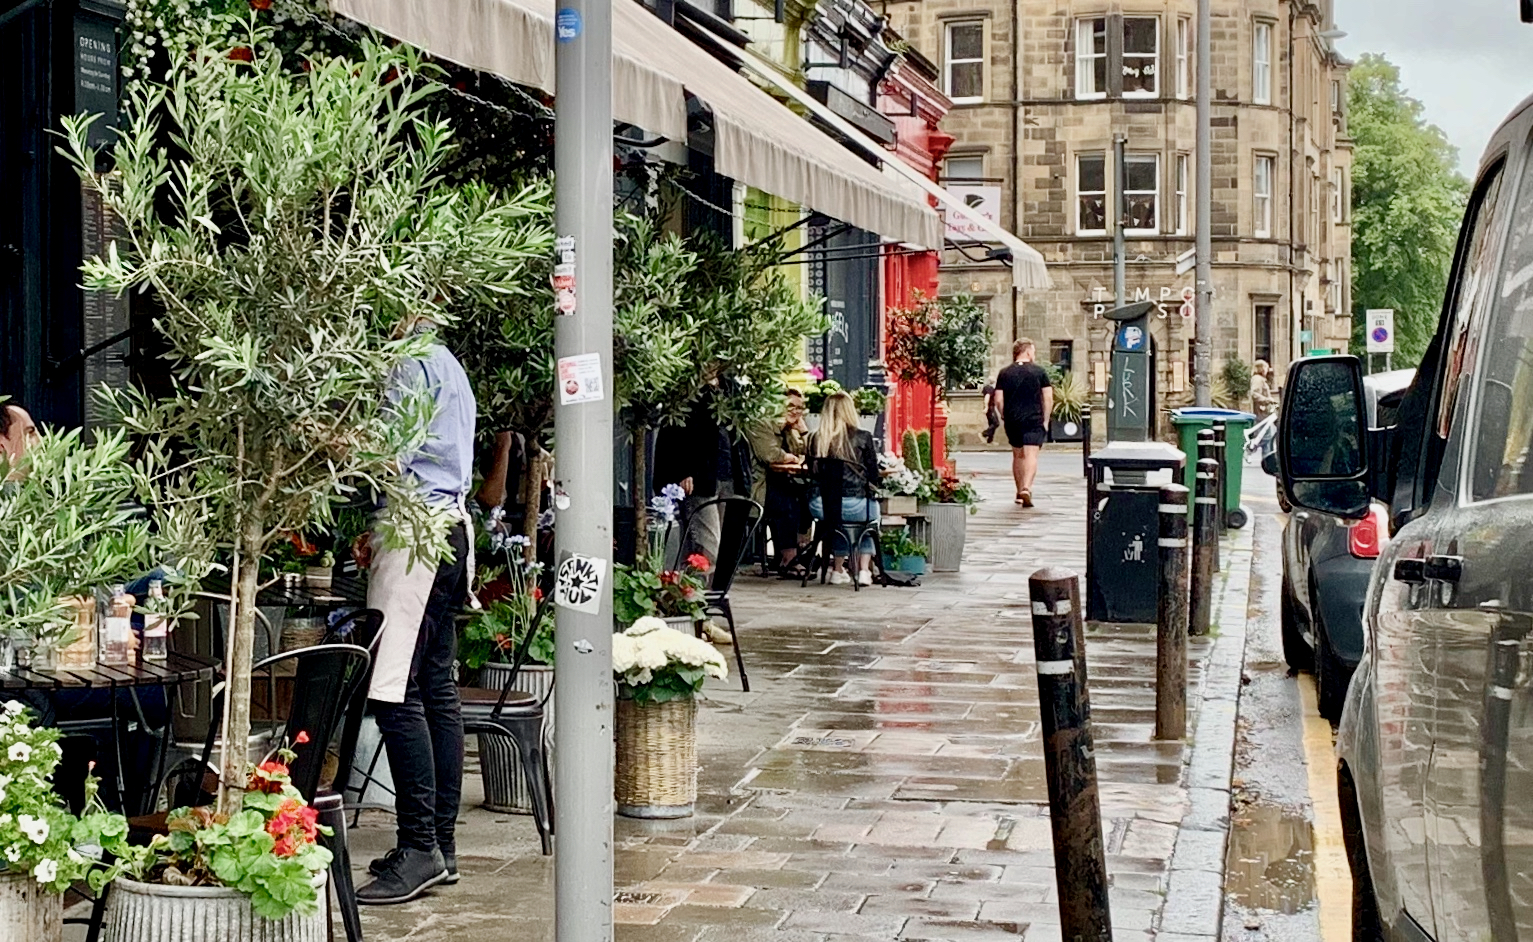 View of pavement outside Montpeliers cafe/bar in Bruntsfield showing effect of street furniture in impeding pedestrians.